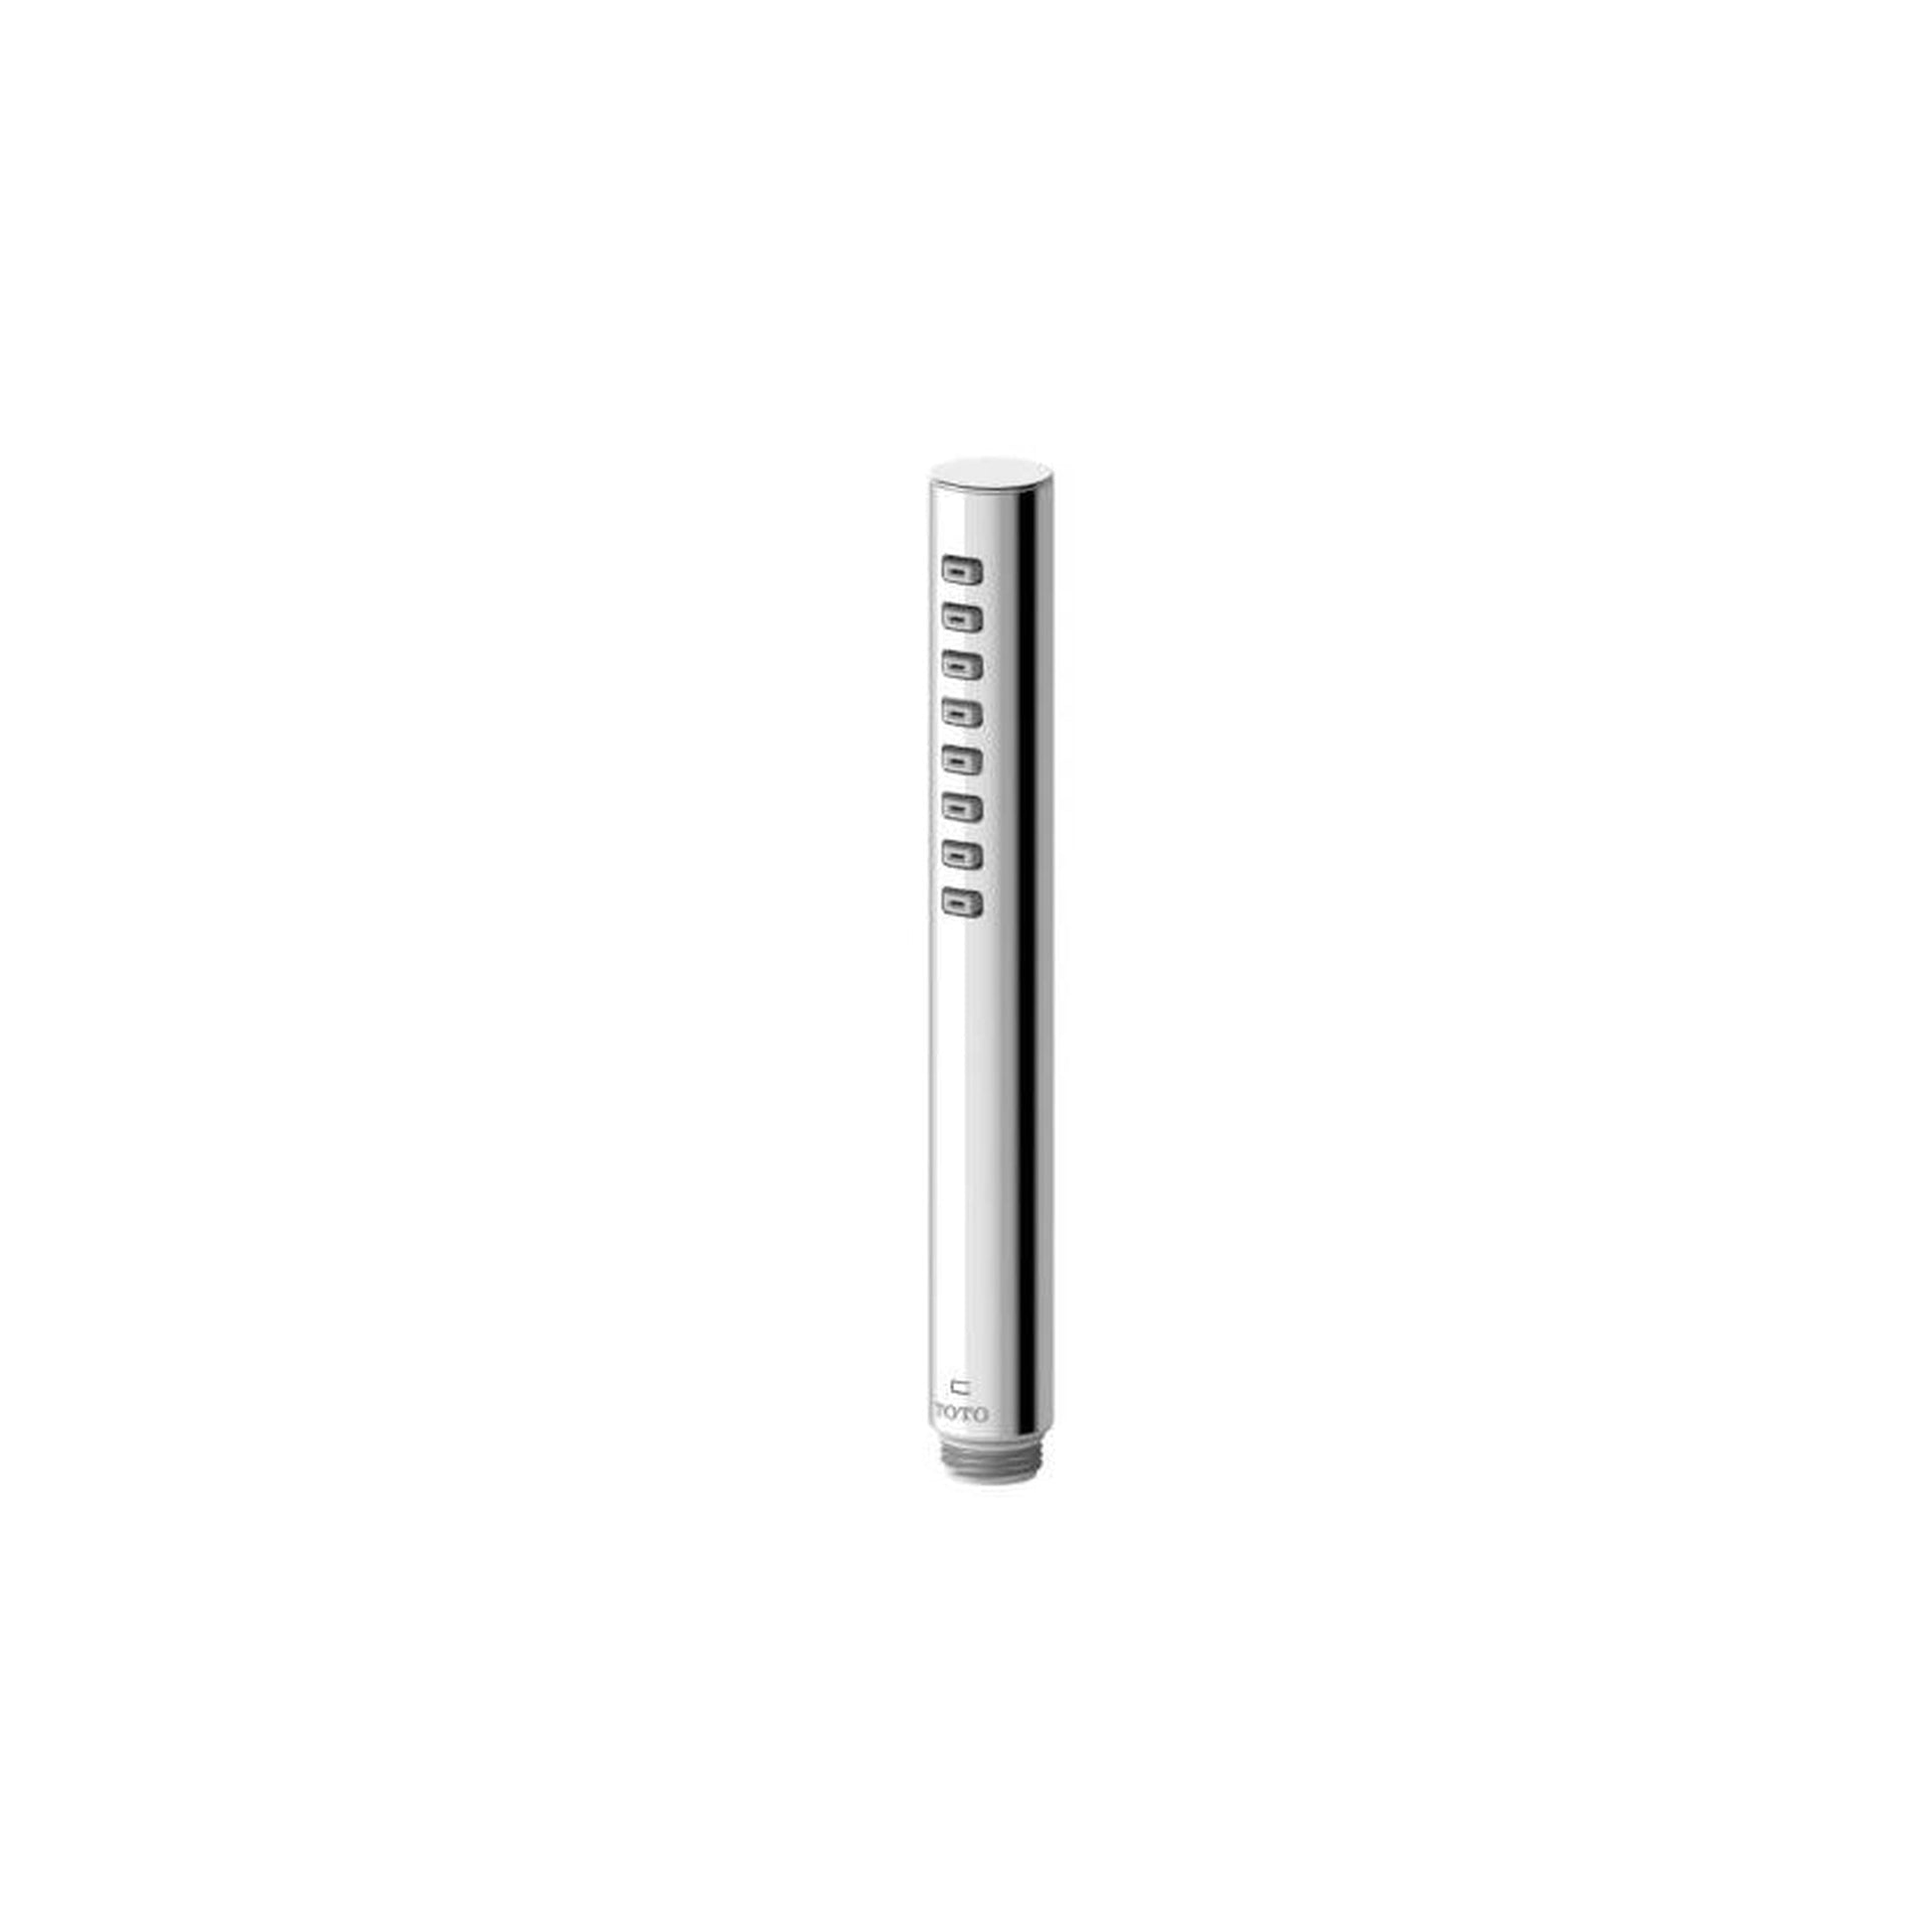 Toto Hs,1MODE,1.75GPM,G,Cylindrical Polished Chrome